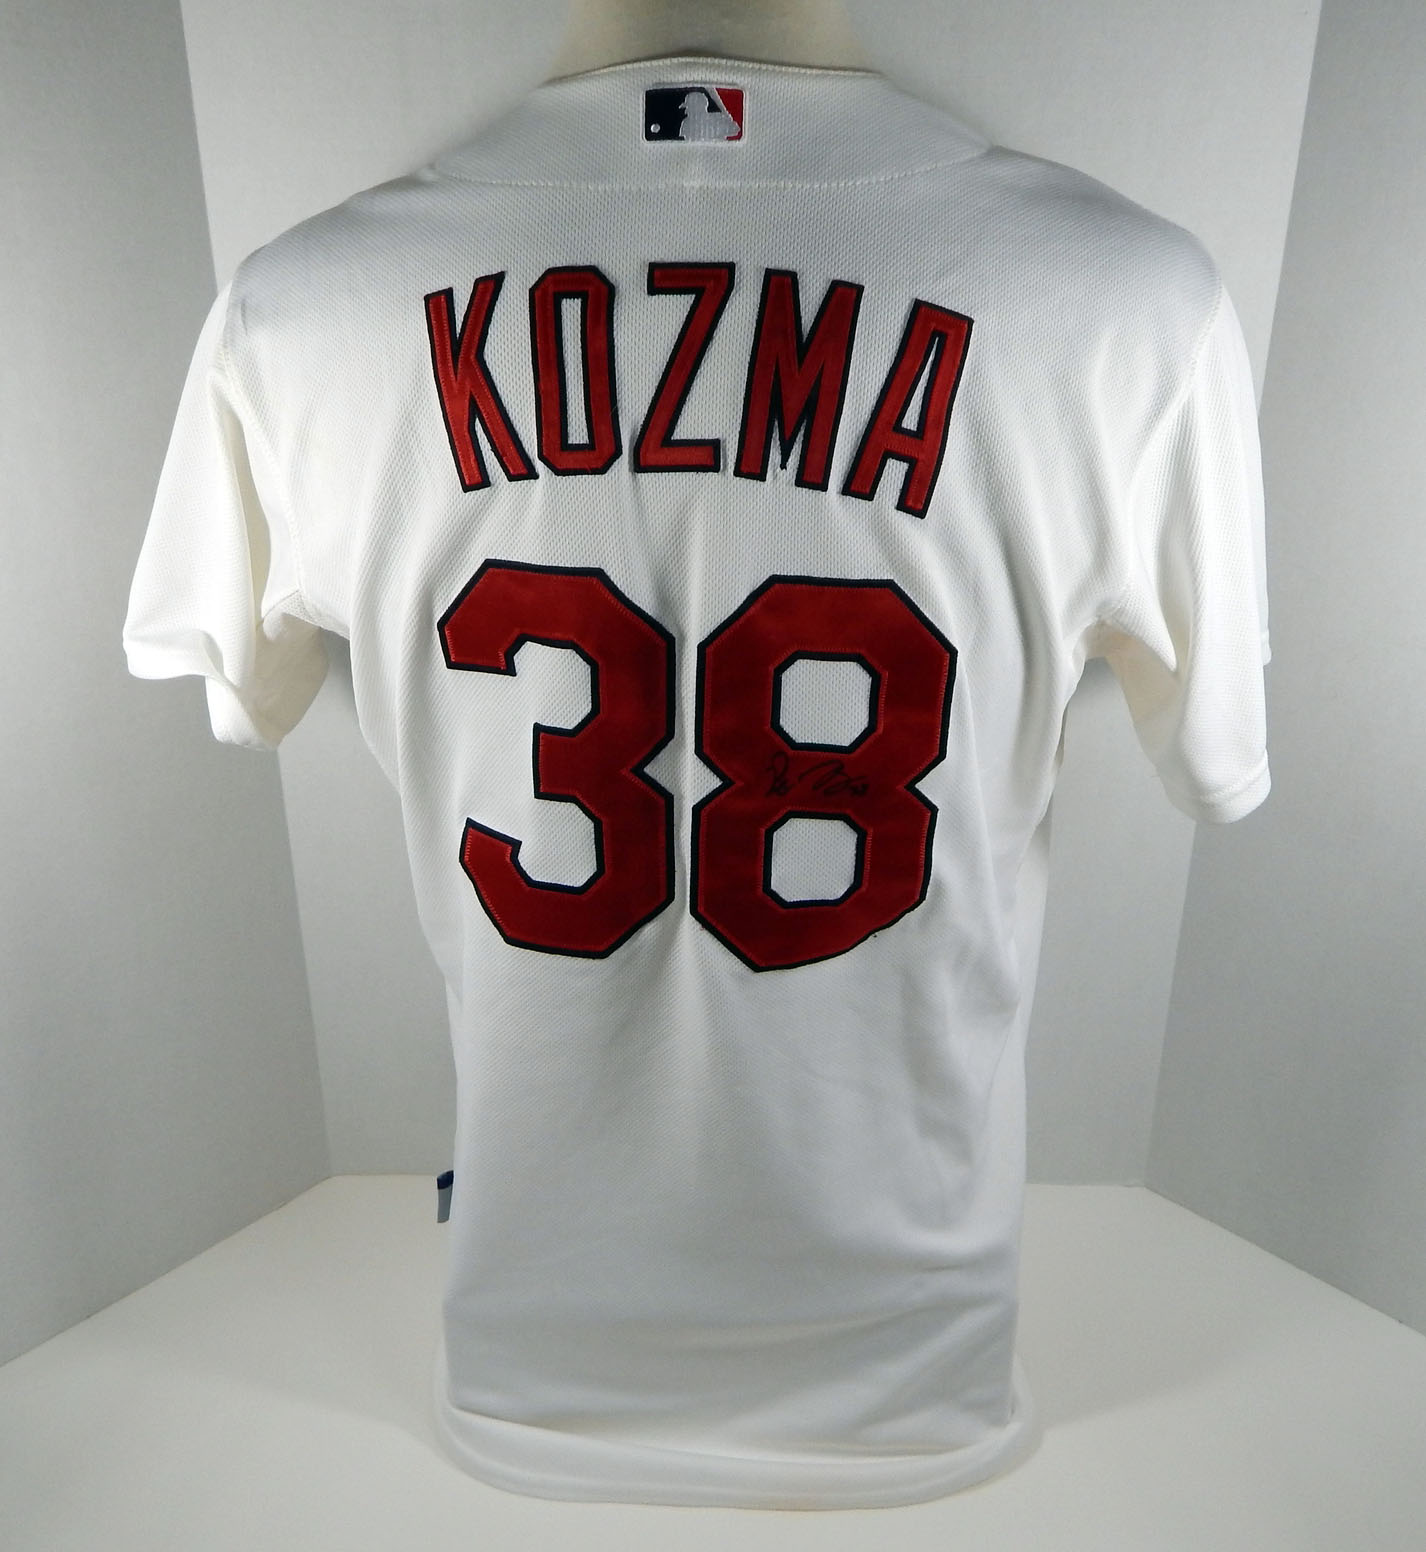 2013 St. Louis Cardinals Peter Kozma #38 Game Issued Signed White Jersey 254 | eBay